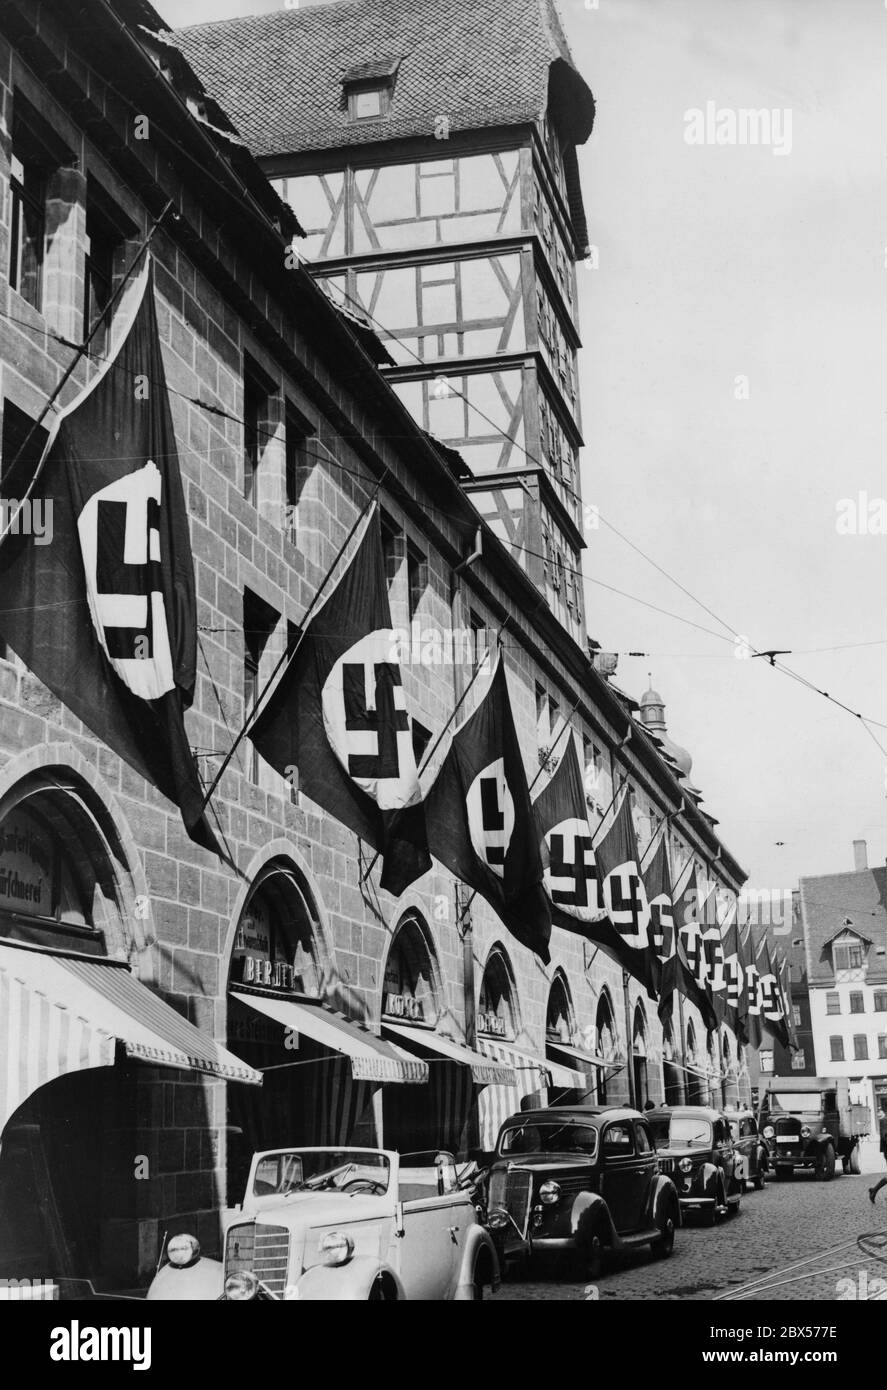 In preparation for the Reich Party Congress, the Mauthalle in the Lorenz Old Town of Nuremberg is decorated with swastika fans. In the foreground are several Mercedes cars. Stock Photo